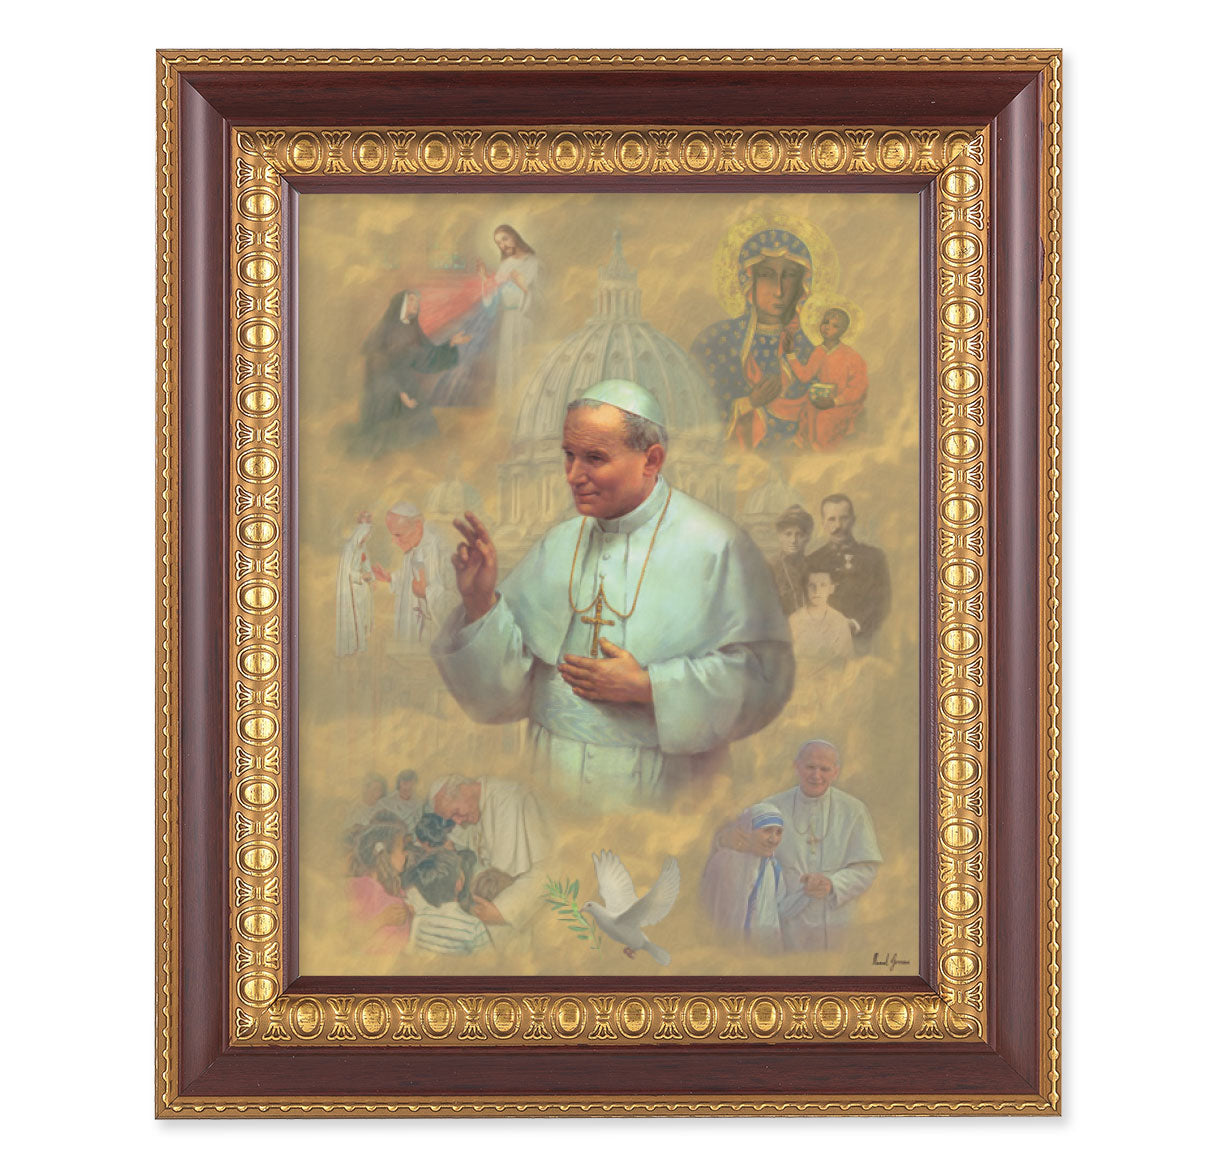 St. Pope John Paul II Picture Framed Wall Art Decor, Large, Dark Cherry with Gold Egg and Dart Detailed Frame